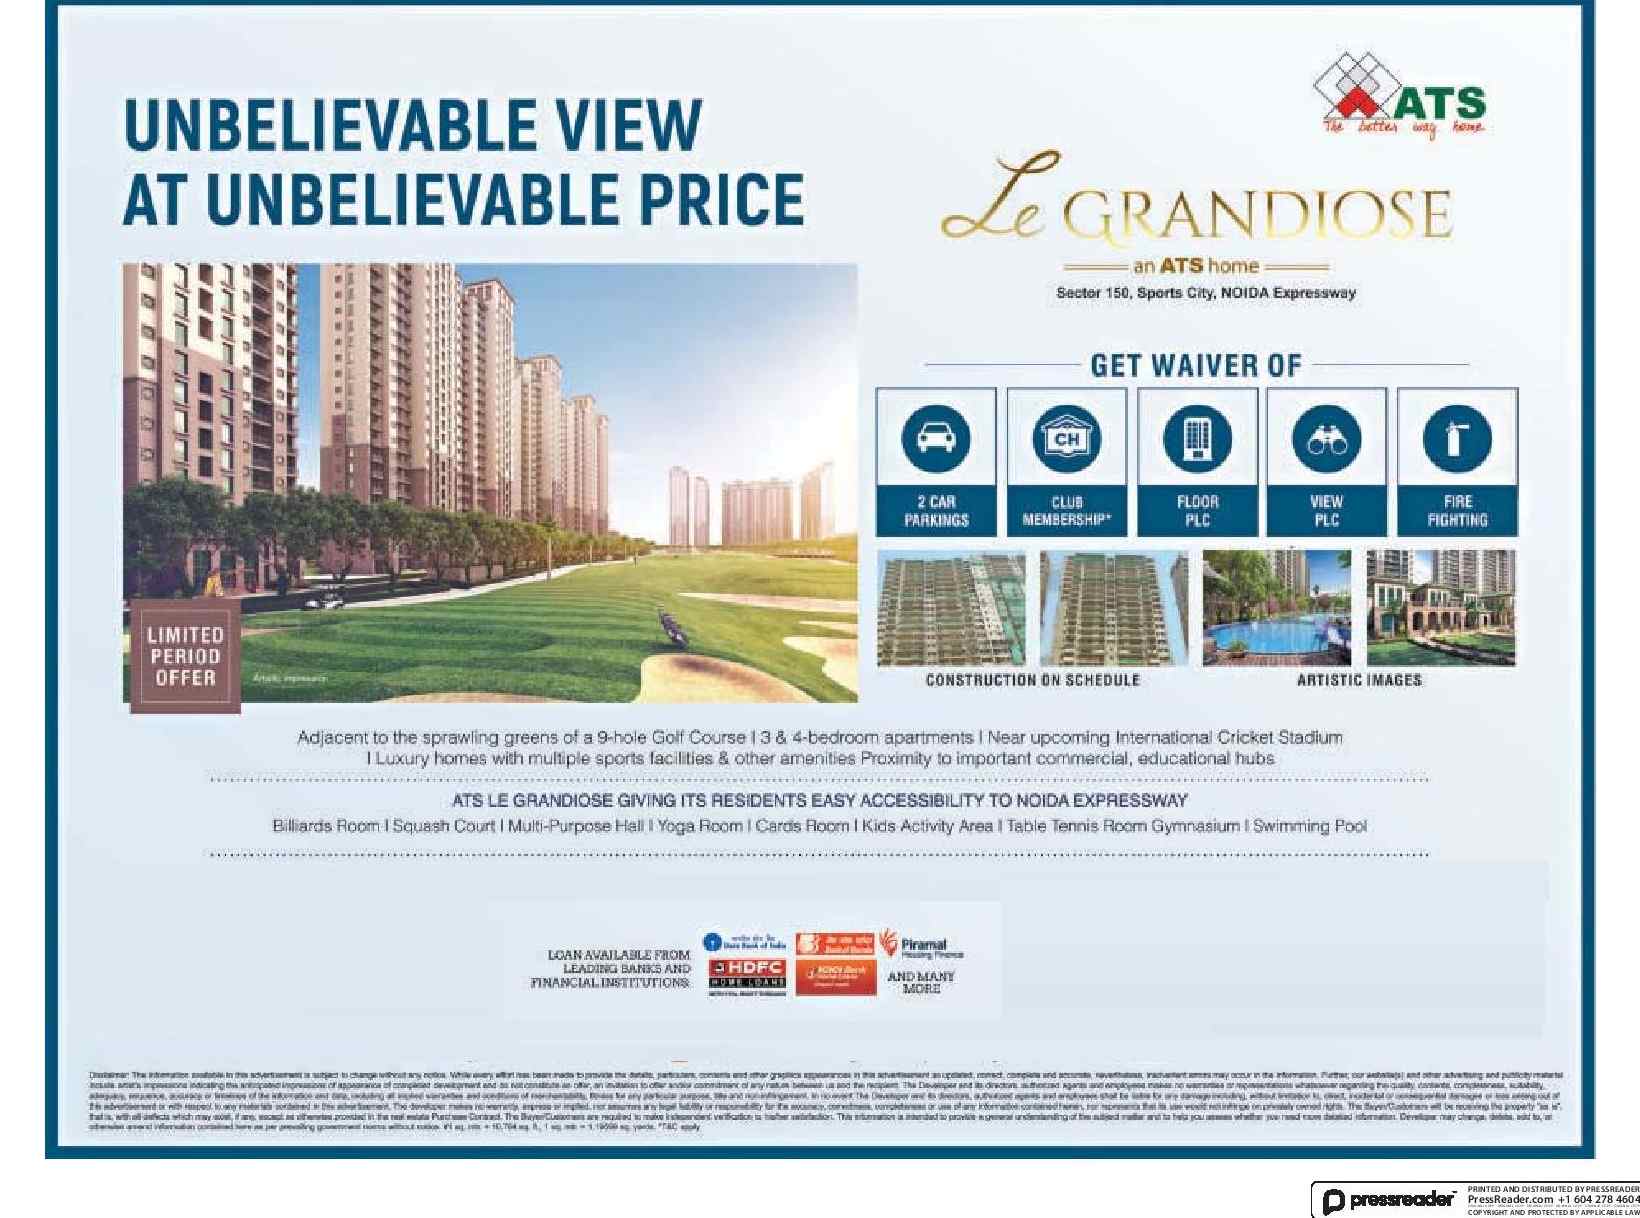 Experience unbelievable view at unbelievable price at ATS Le Grandiose in Noida Update